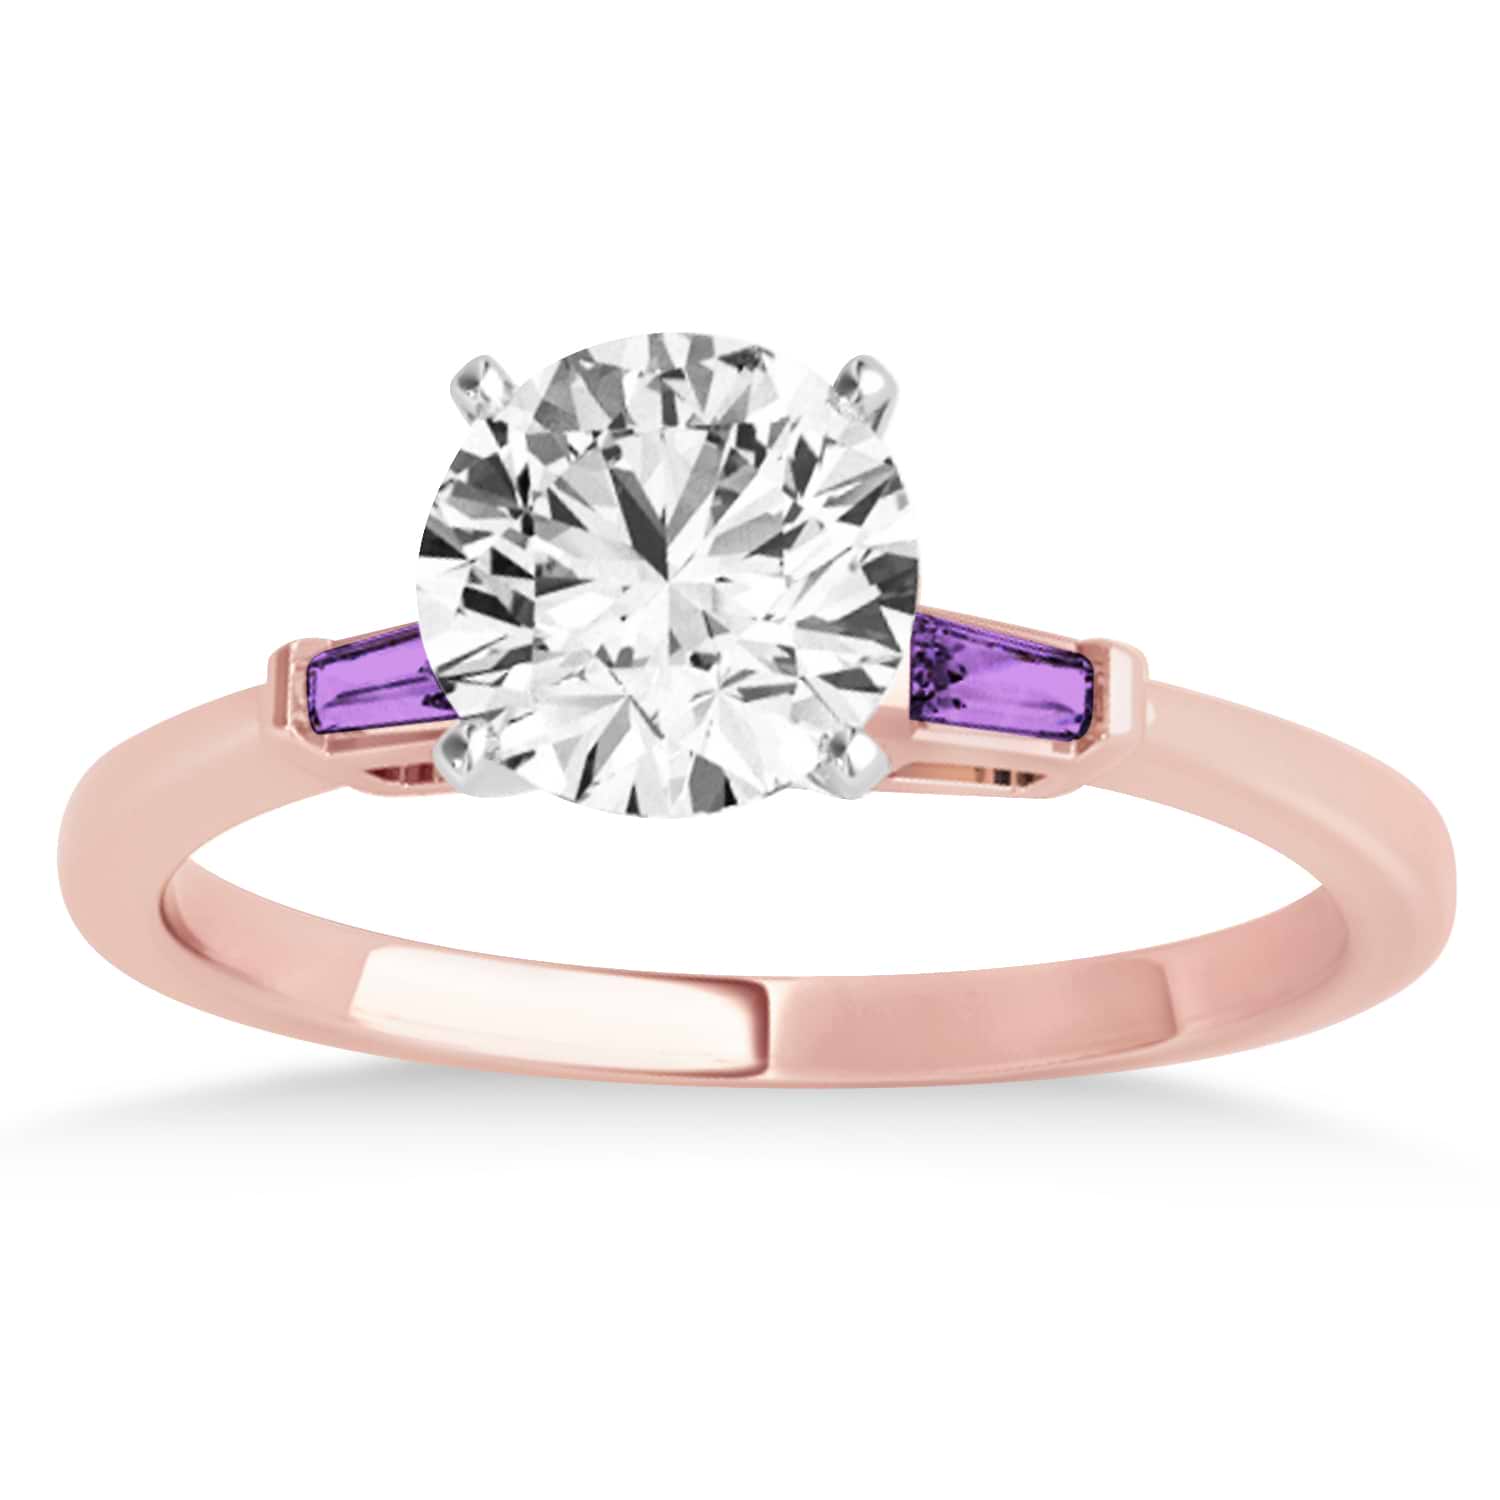 Tapered Baguette 3-Stone Amethyst Engagement Ring 14k Rose Gold (0.10ct)